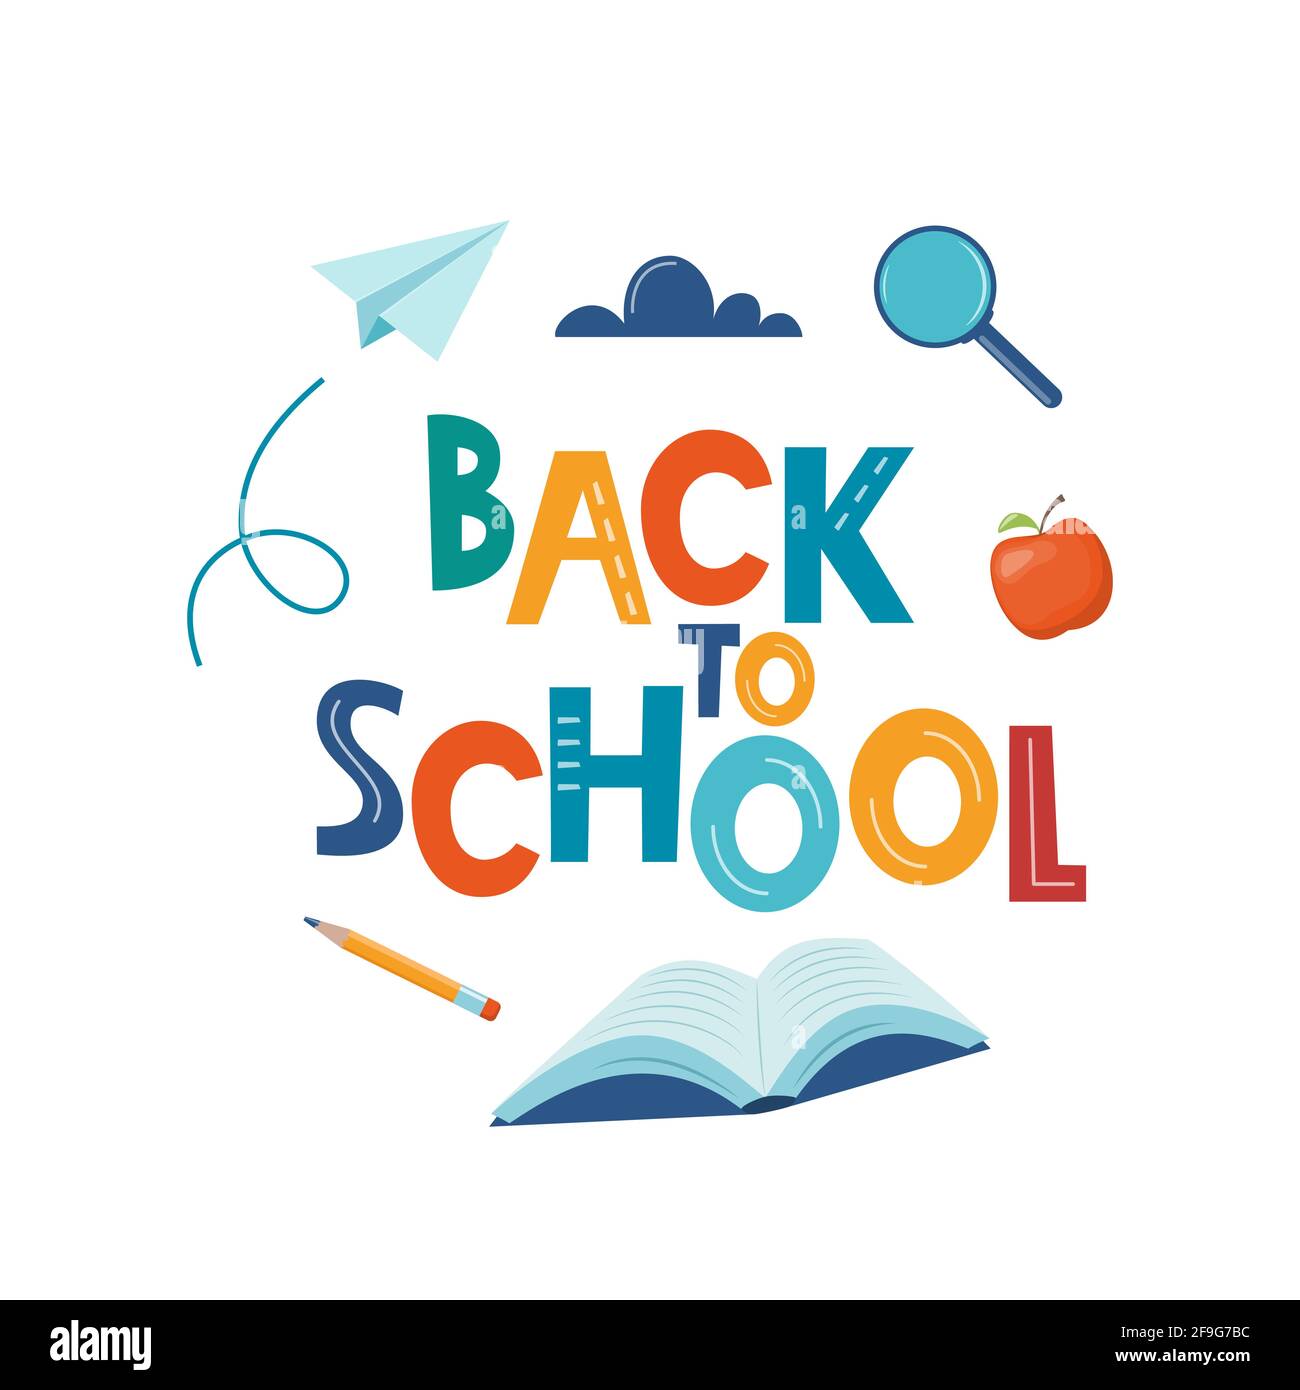 Back to school poster, banner. Lettering Back to school inscription with study supplies and paper airplane. Education concept design. Vector Stock Vector